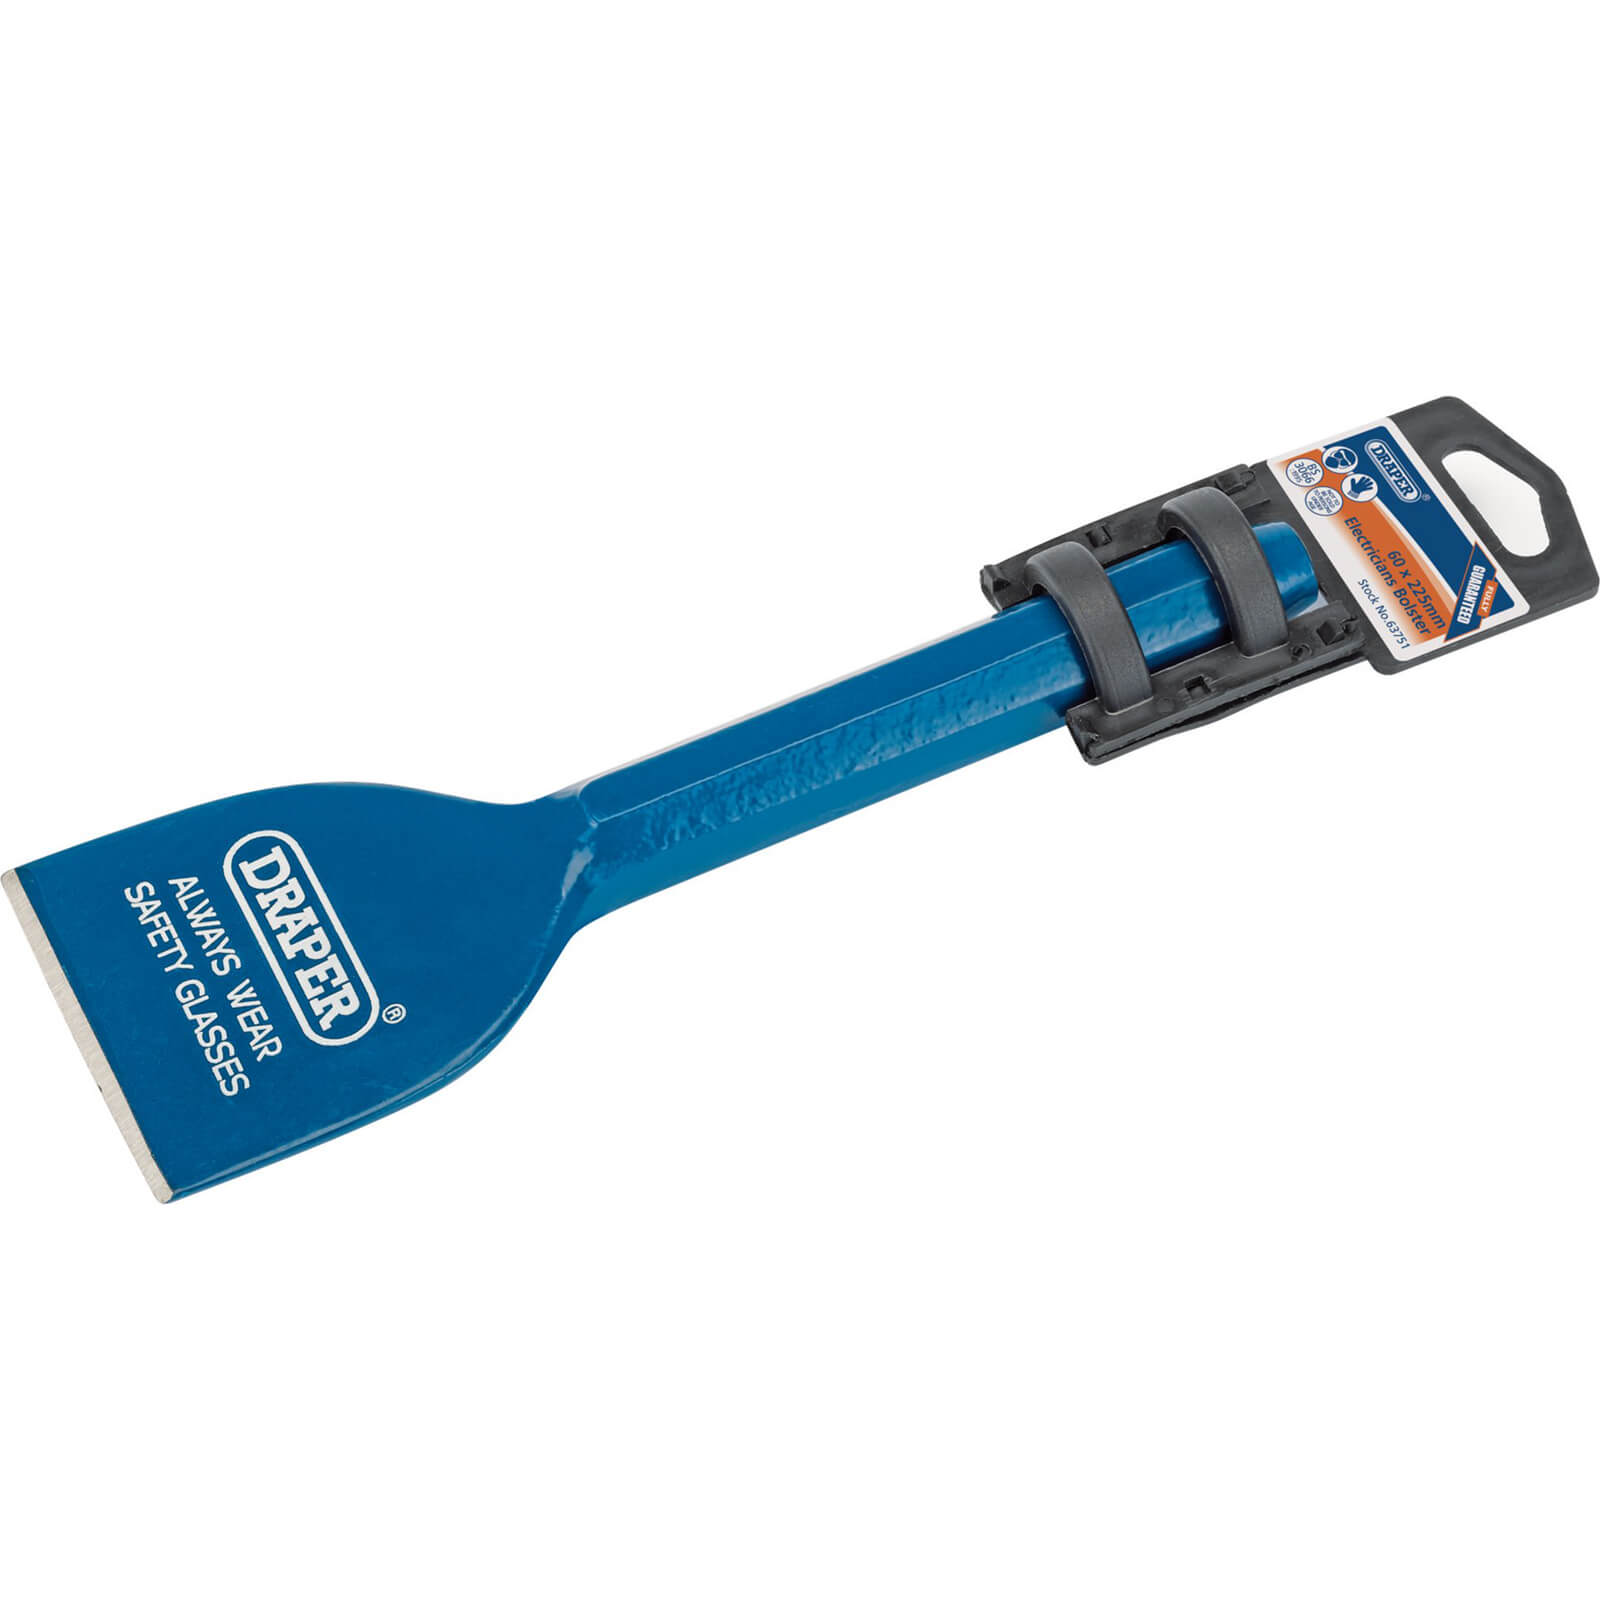 Photo of Draper Electricians Bolster Chisel 60mm